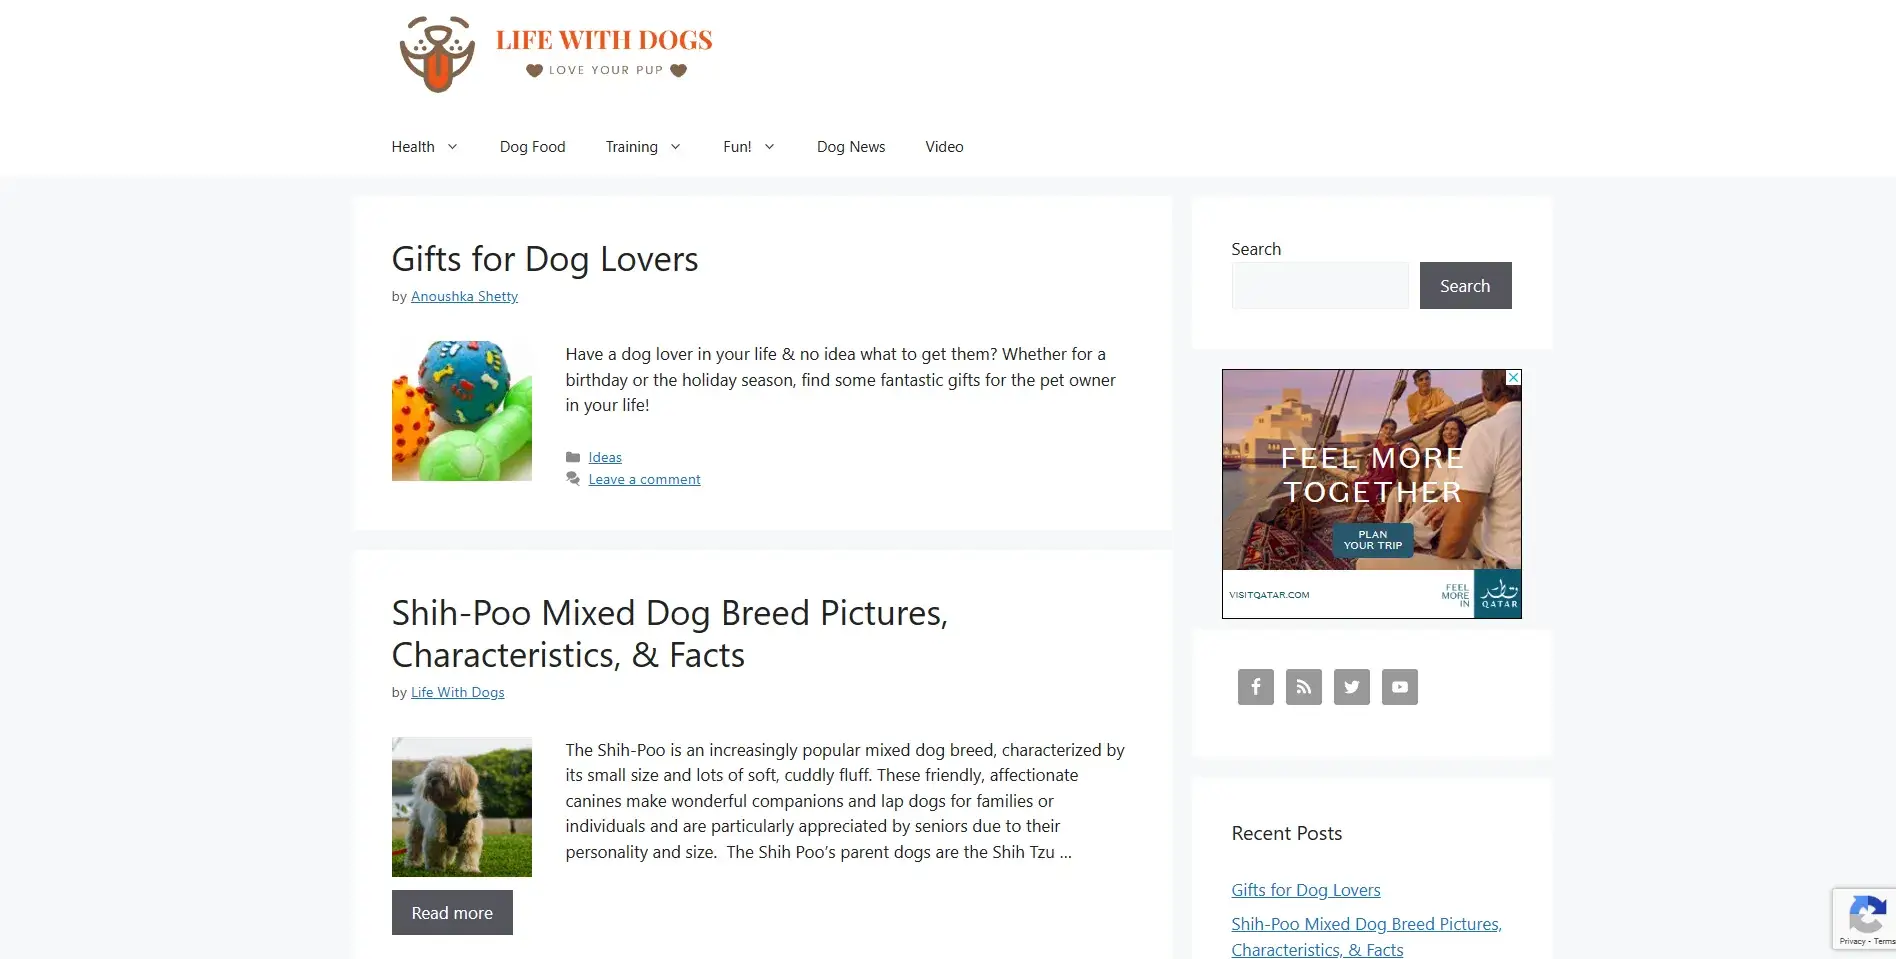 Blogs for dogs: Life with Dogs